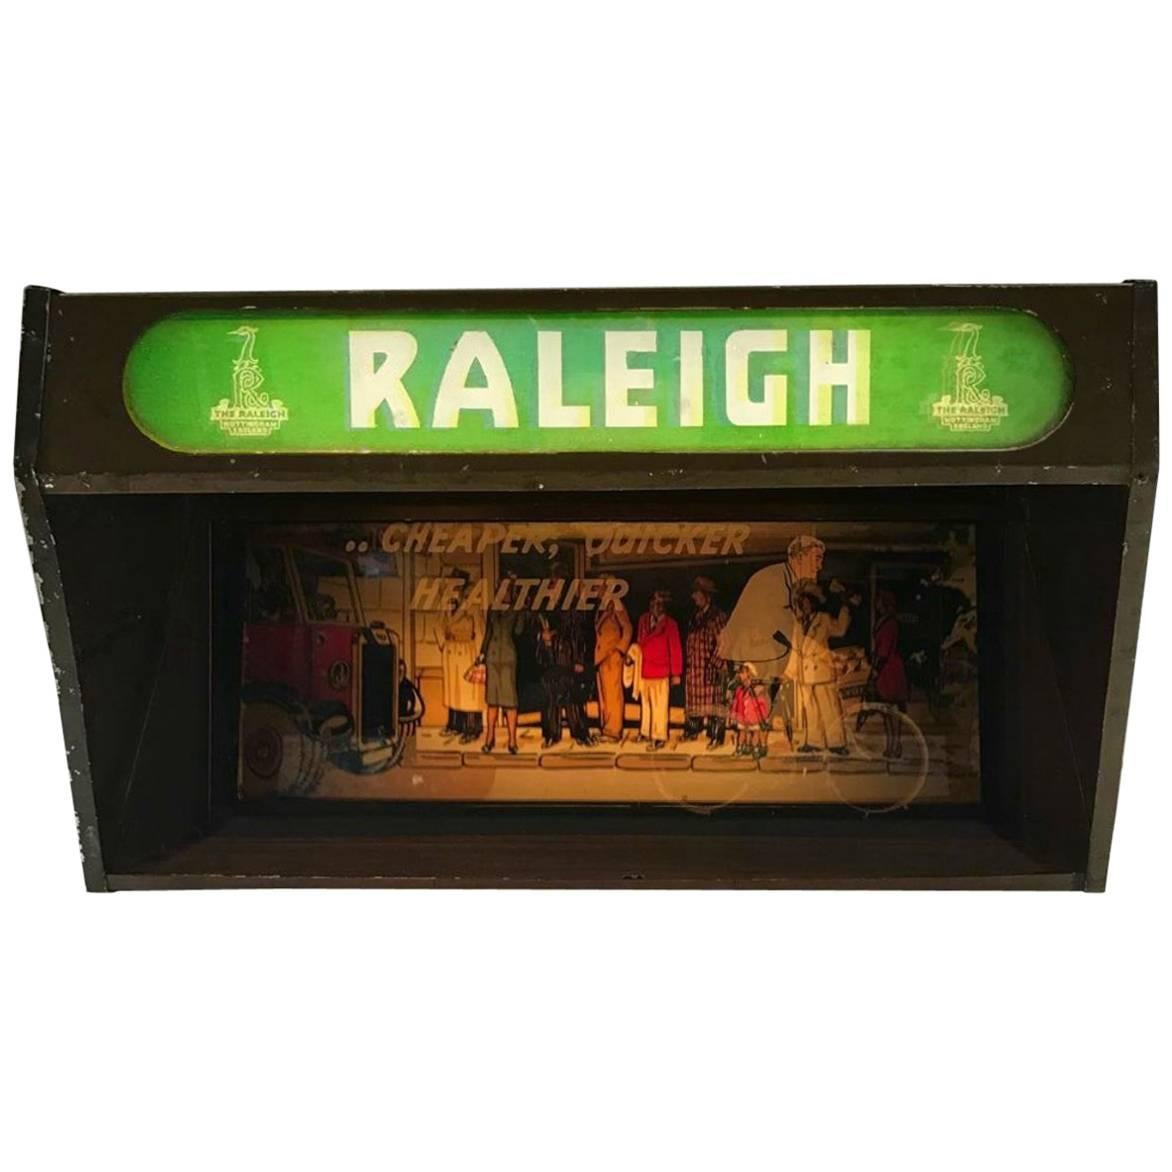 Raleigh Cycles Advertising Light Box For Sale